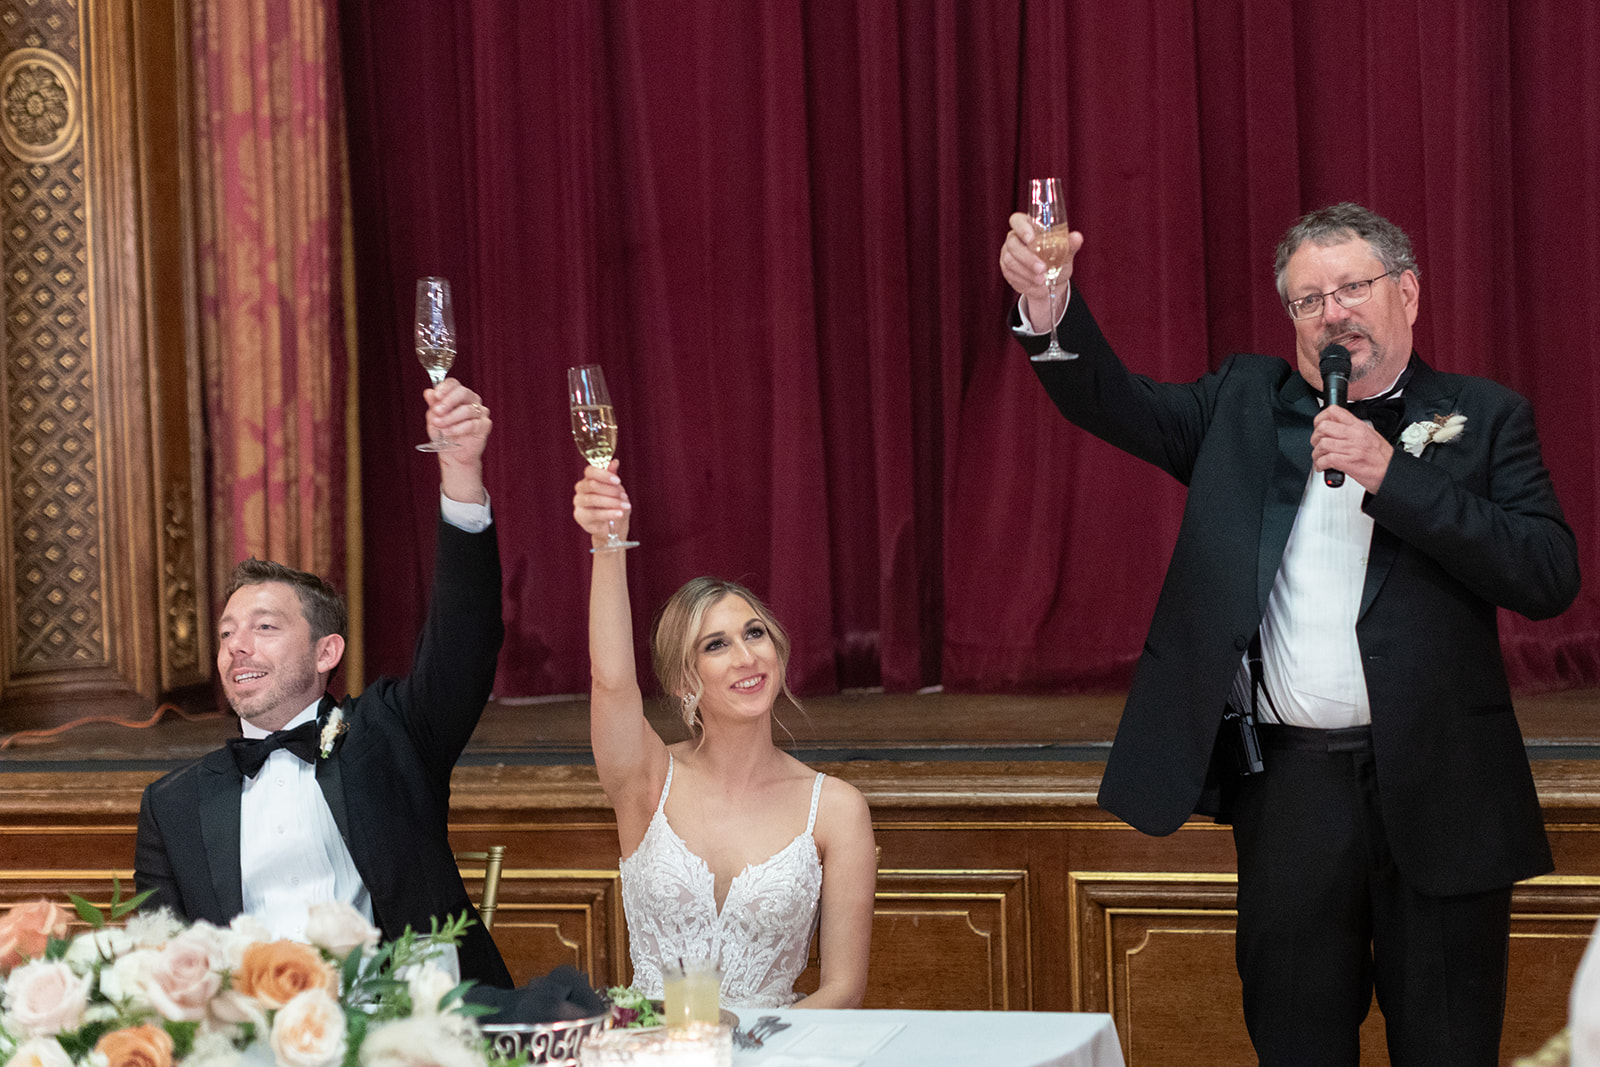 Father of the bride toasts newly weds.